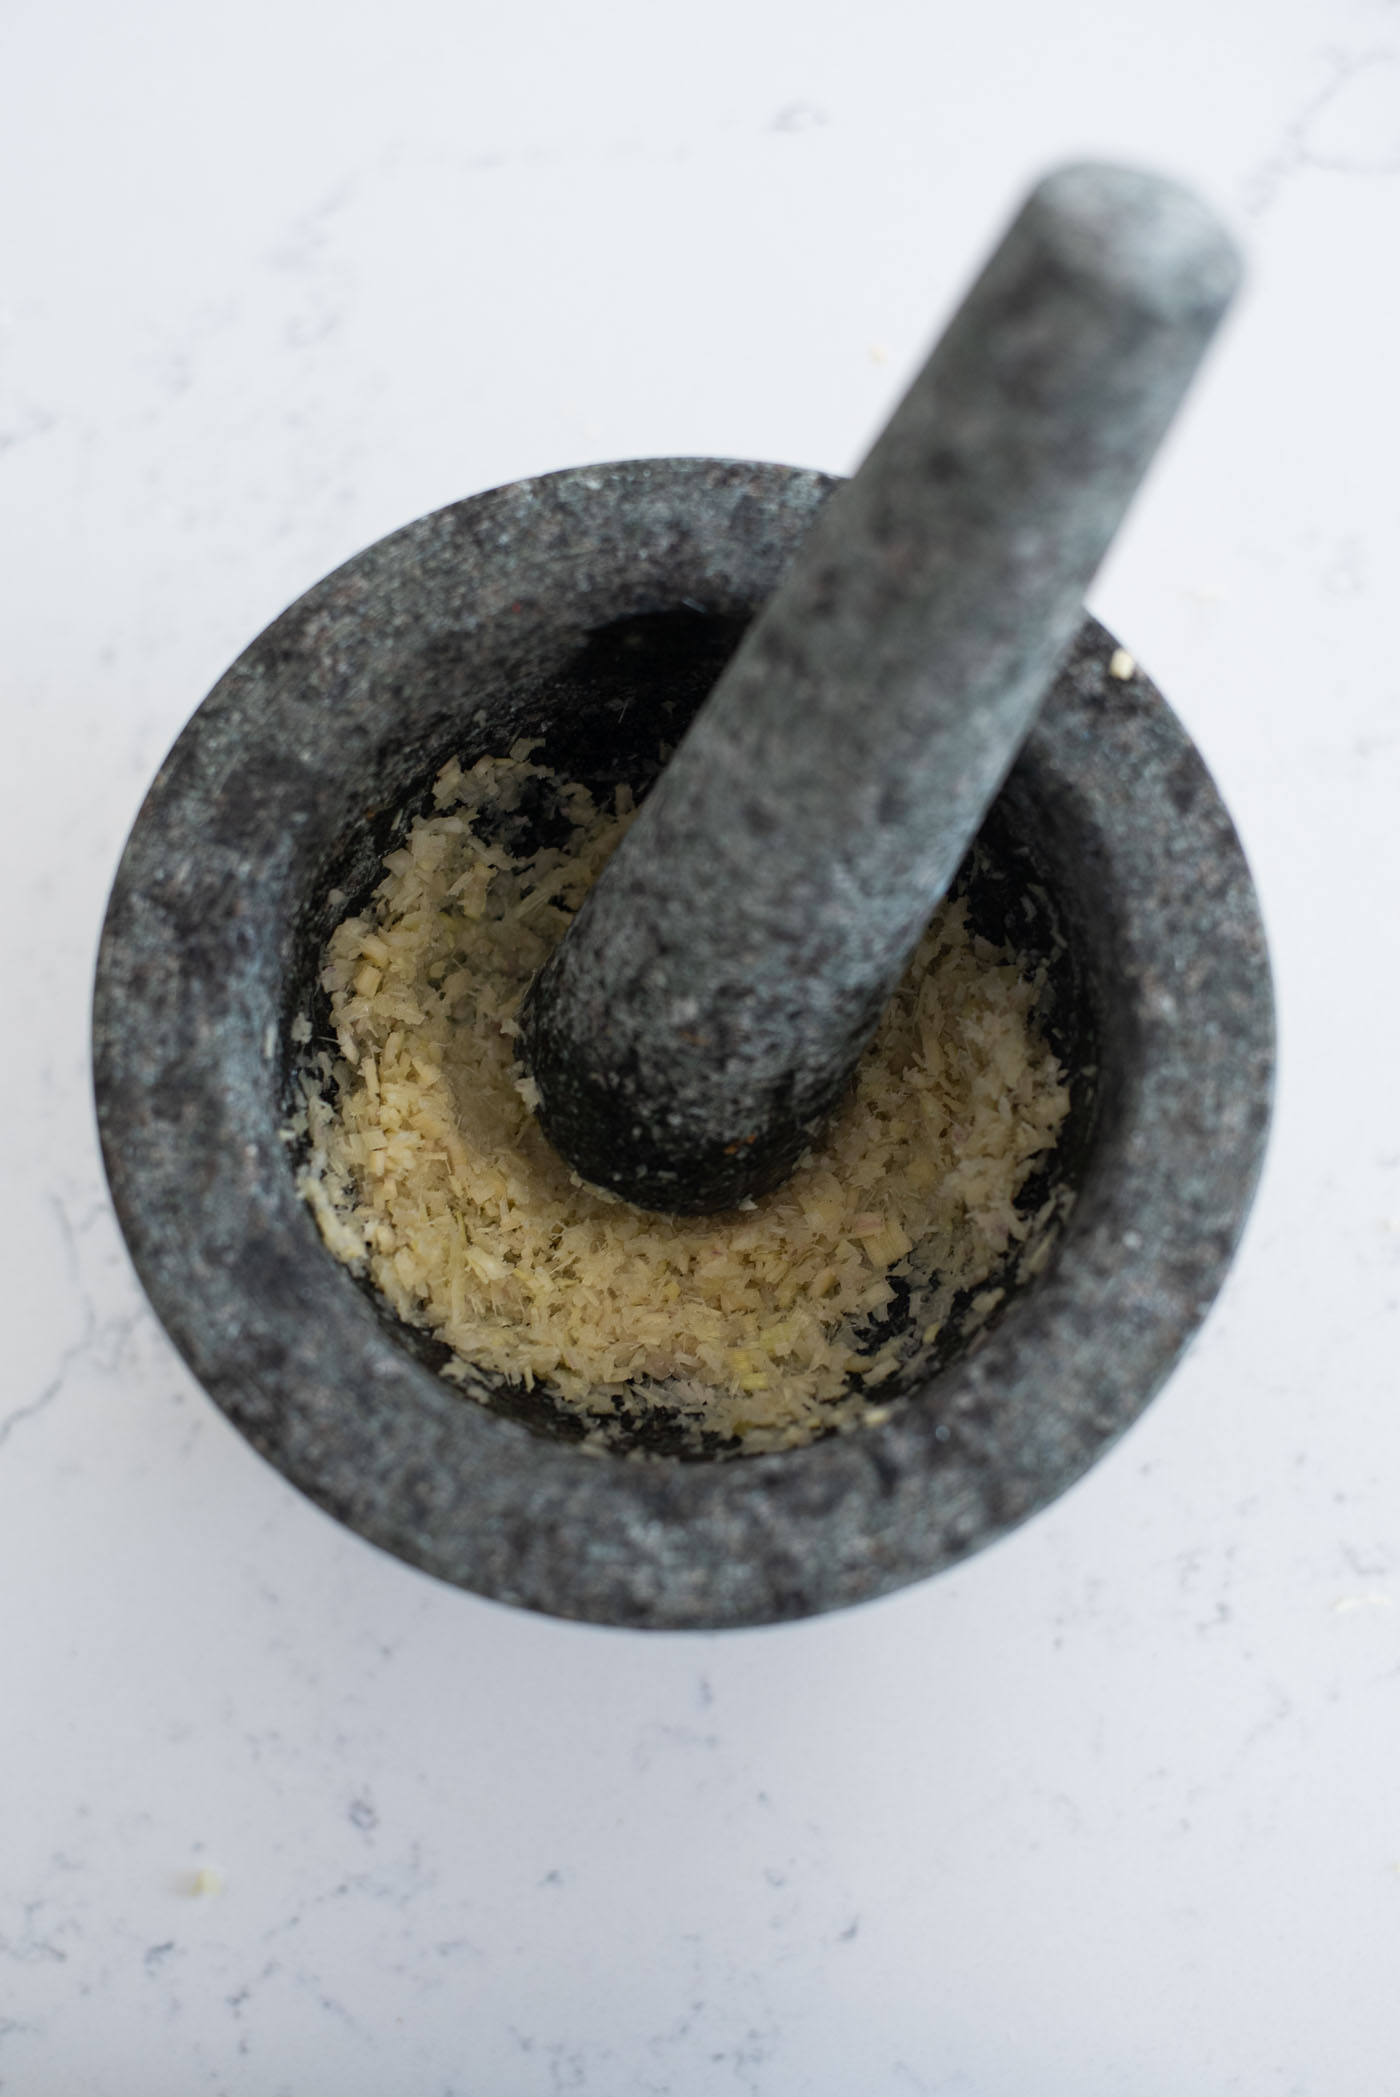 Lemongrass and garlic are pounded in a mortar and pestle